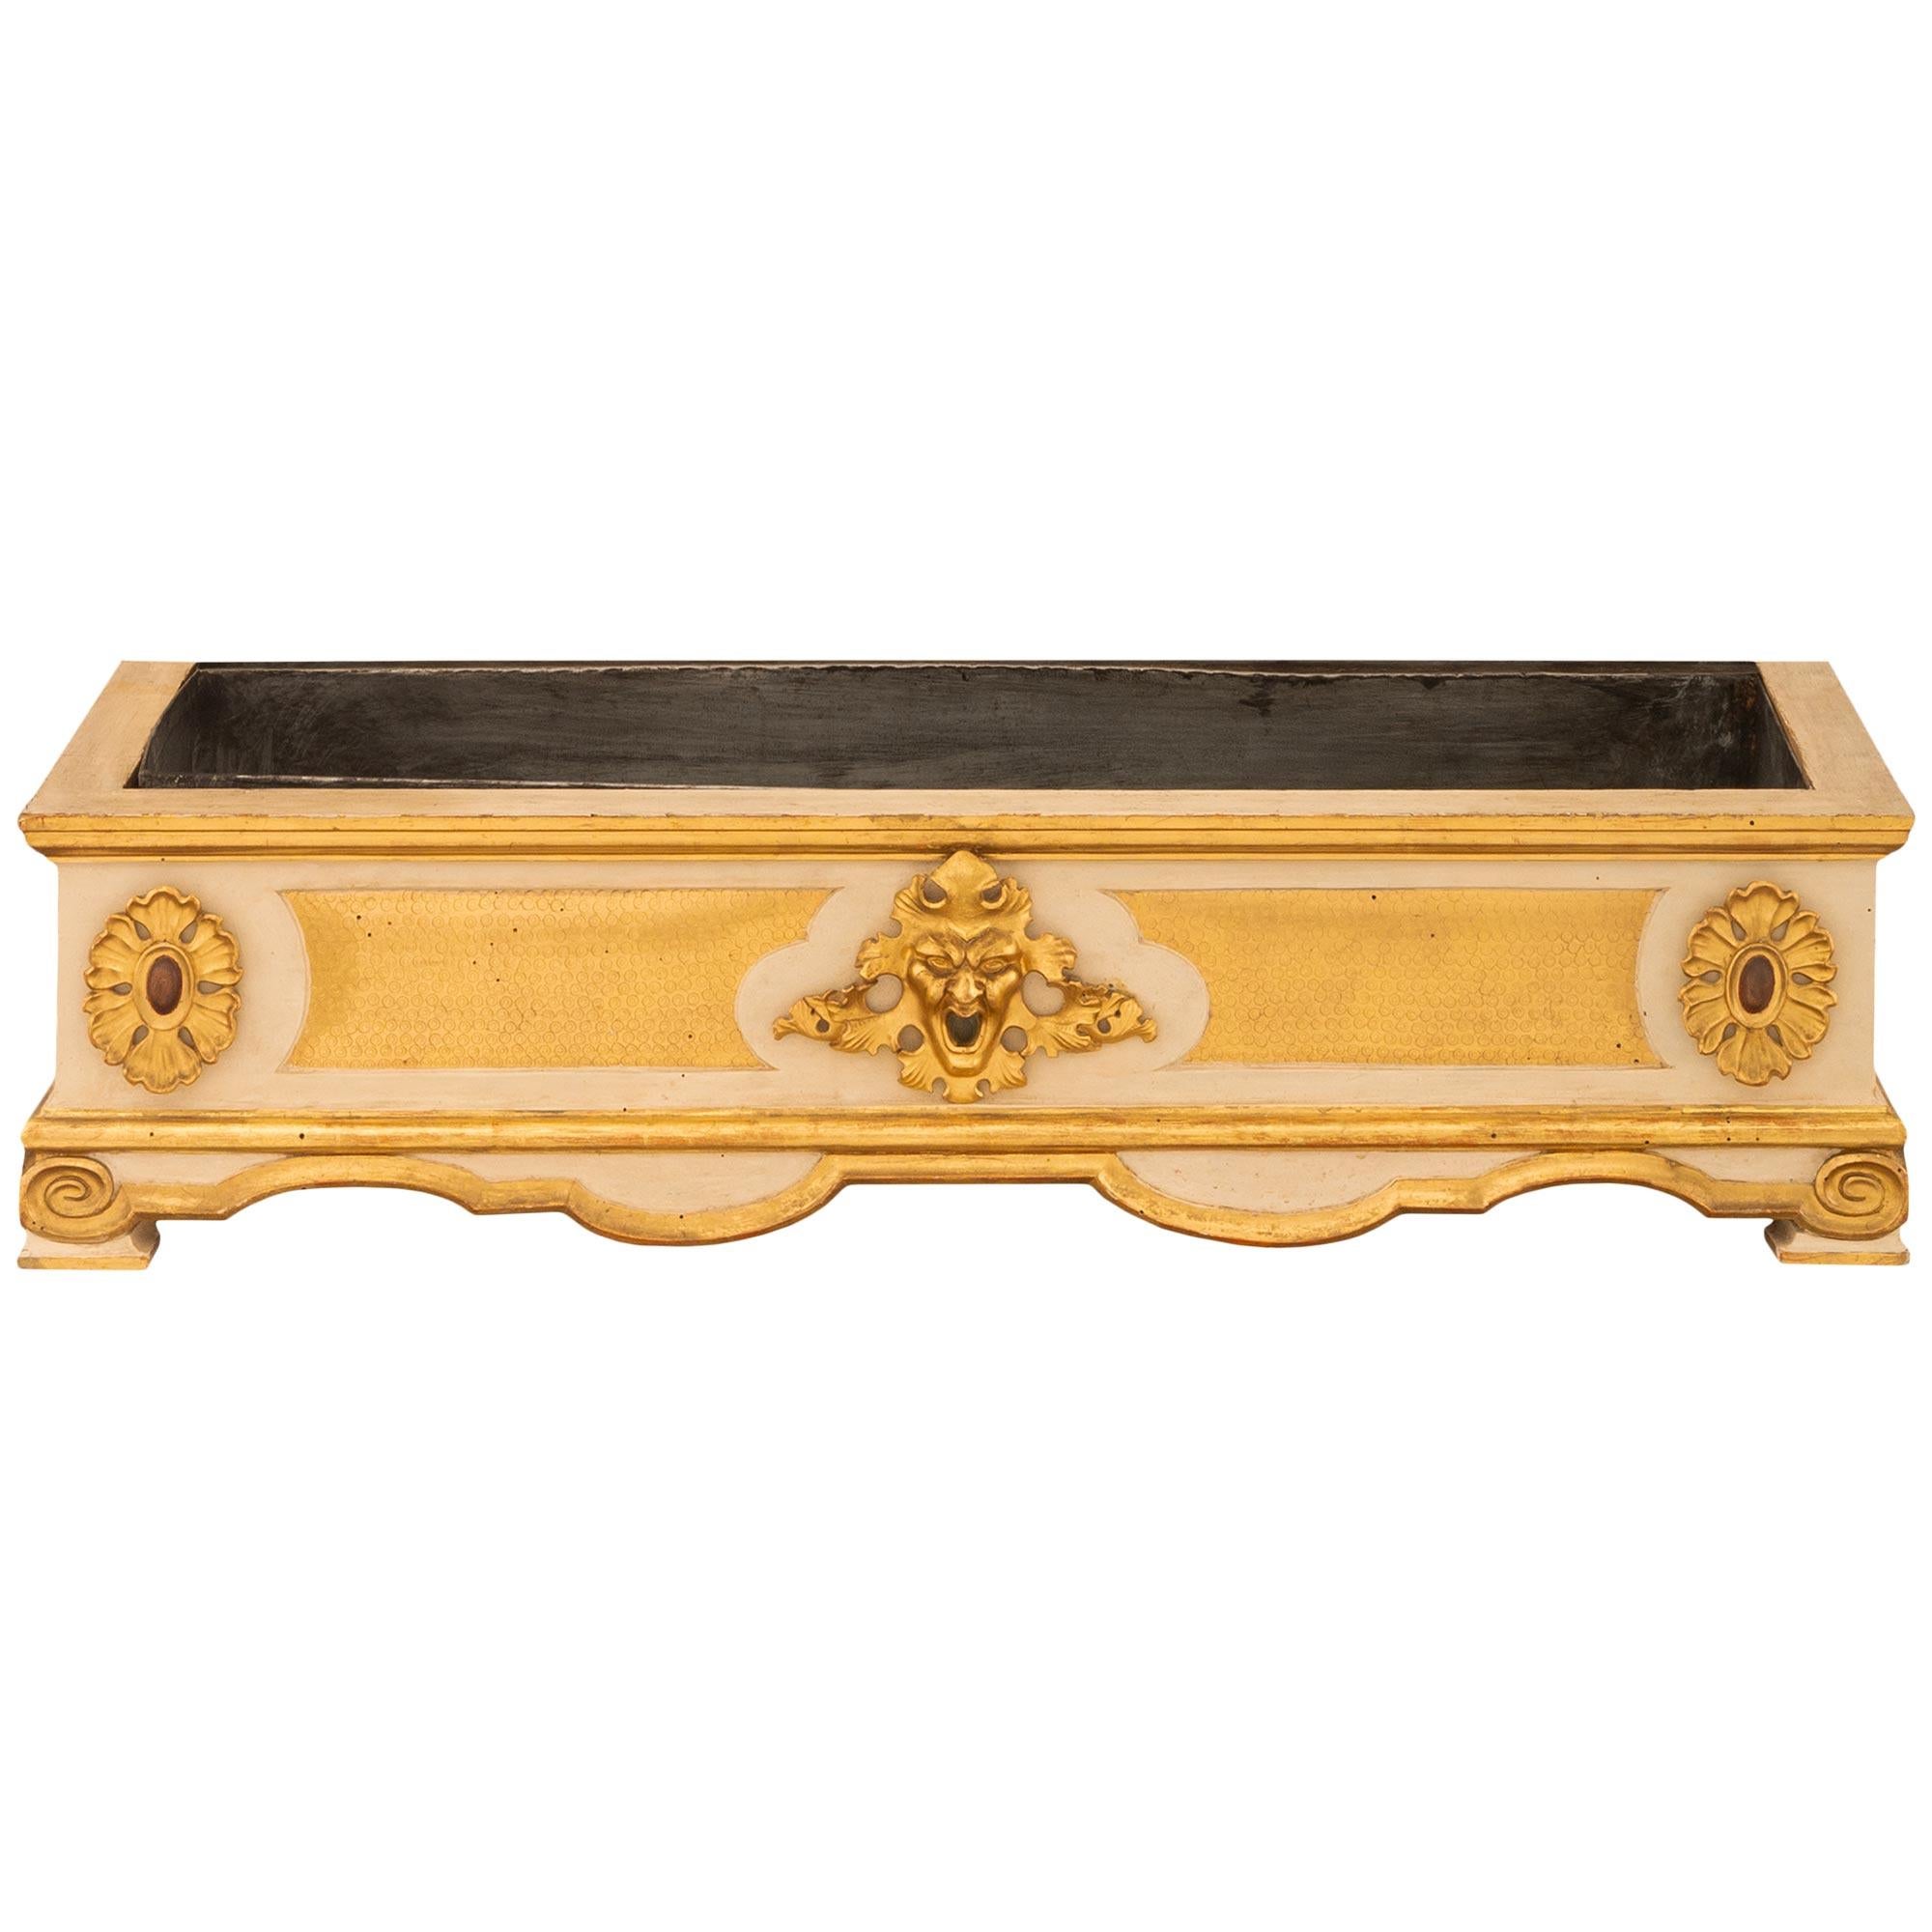 A most decorative and unique Italian 19th century Baroque st. patinated wood and Giltwood planter. The planter is raised on mottled feet below a scalloped shaped frieze with a beautiful Giltwood band. At the front center is an impressive and finely